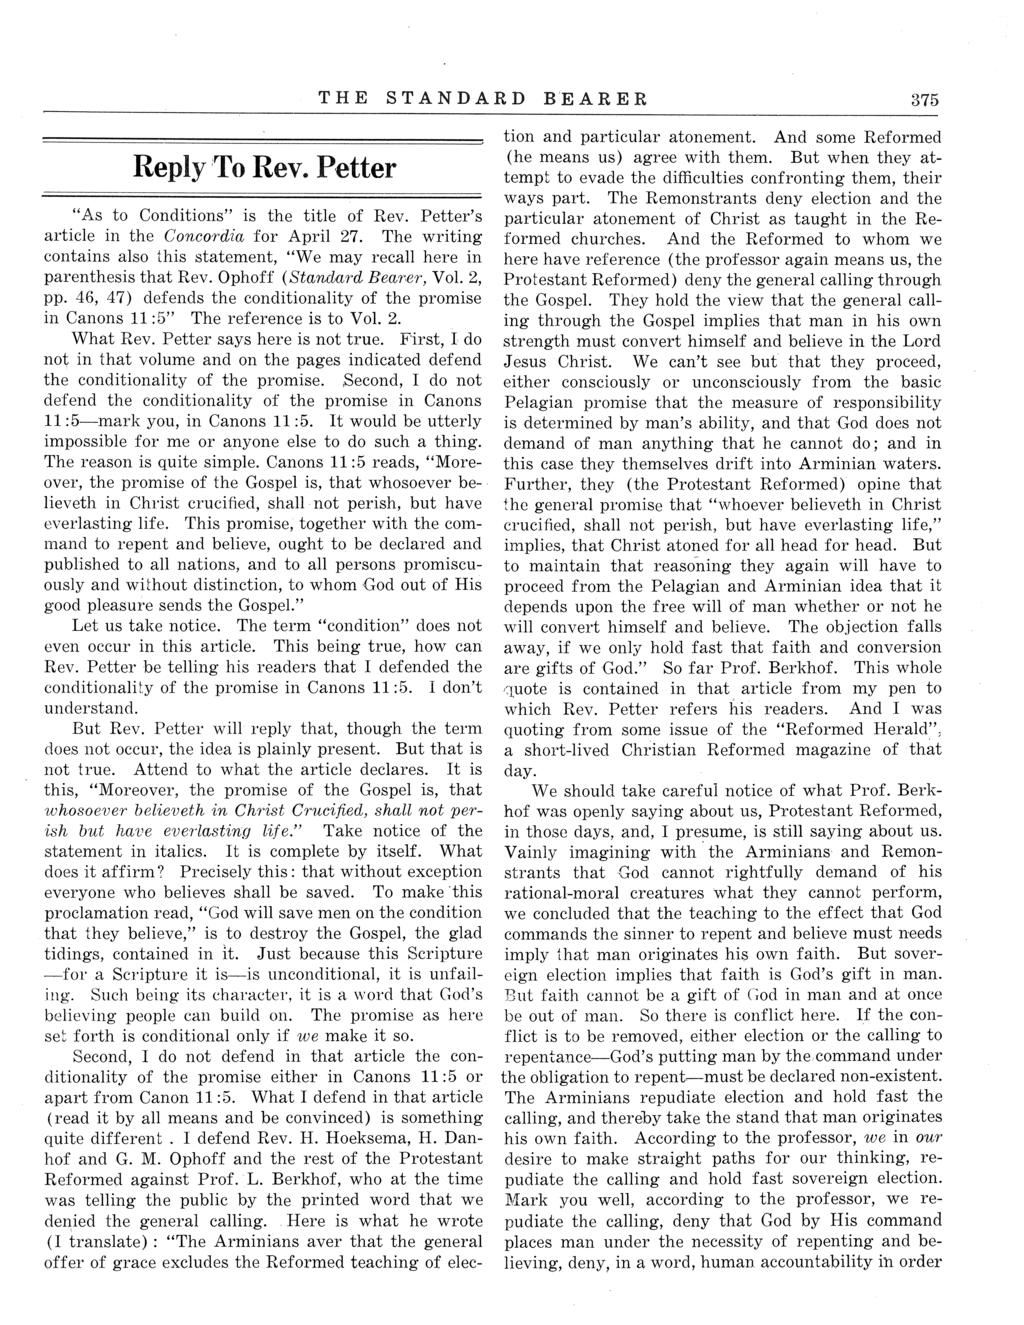 THE STANDARD BEARER 375 Reply To Rev. Petter As to Conditions is the title of Rev. Petter's article in the Concordia for April 27.